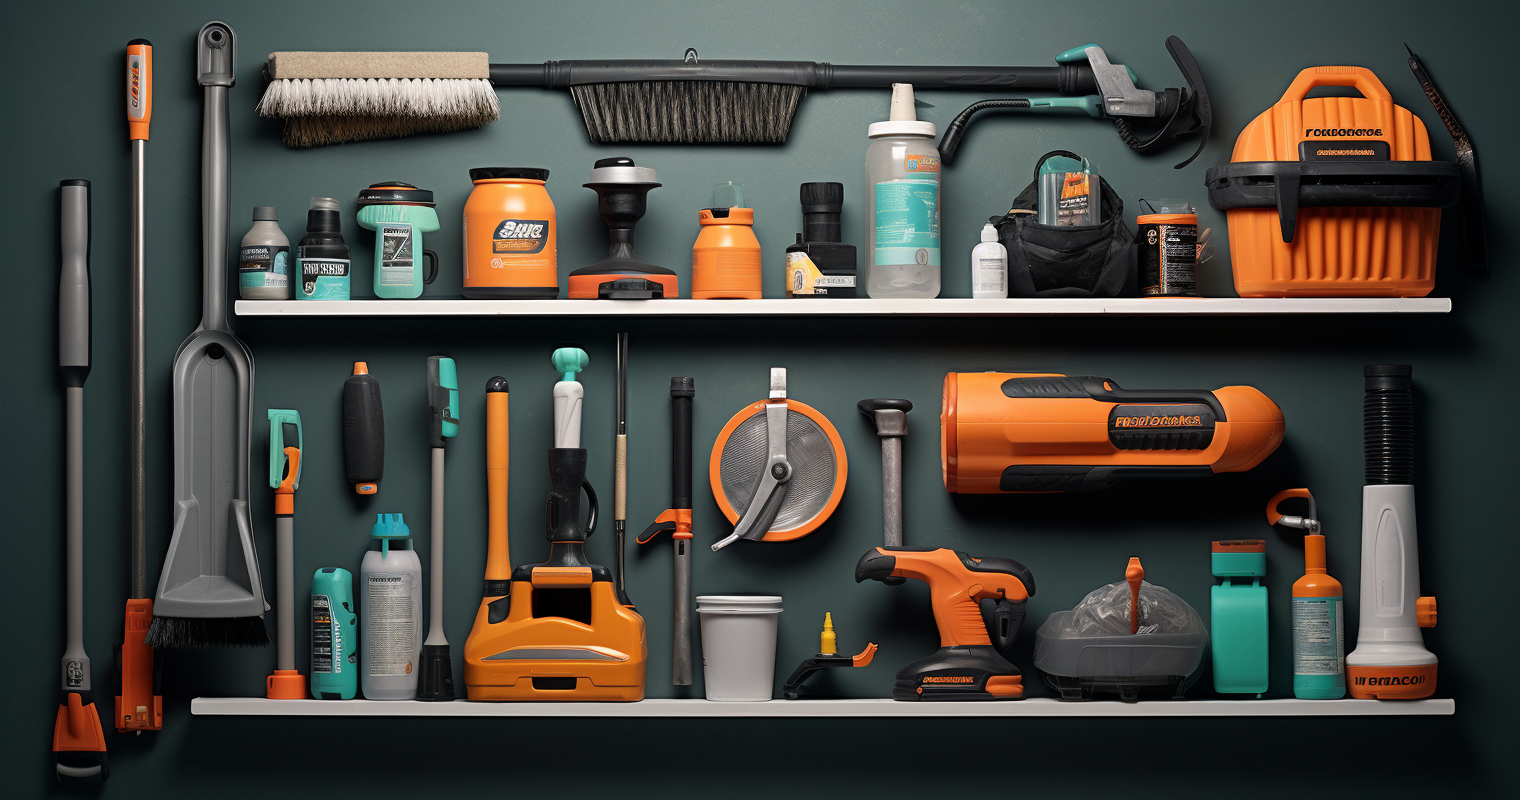 How To Clean Power Tools Effectively